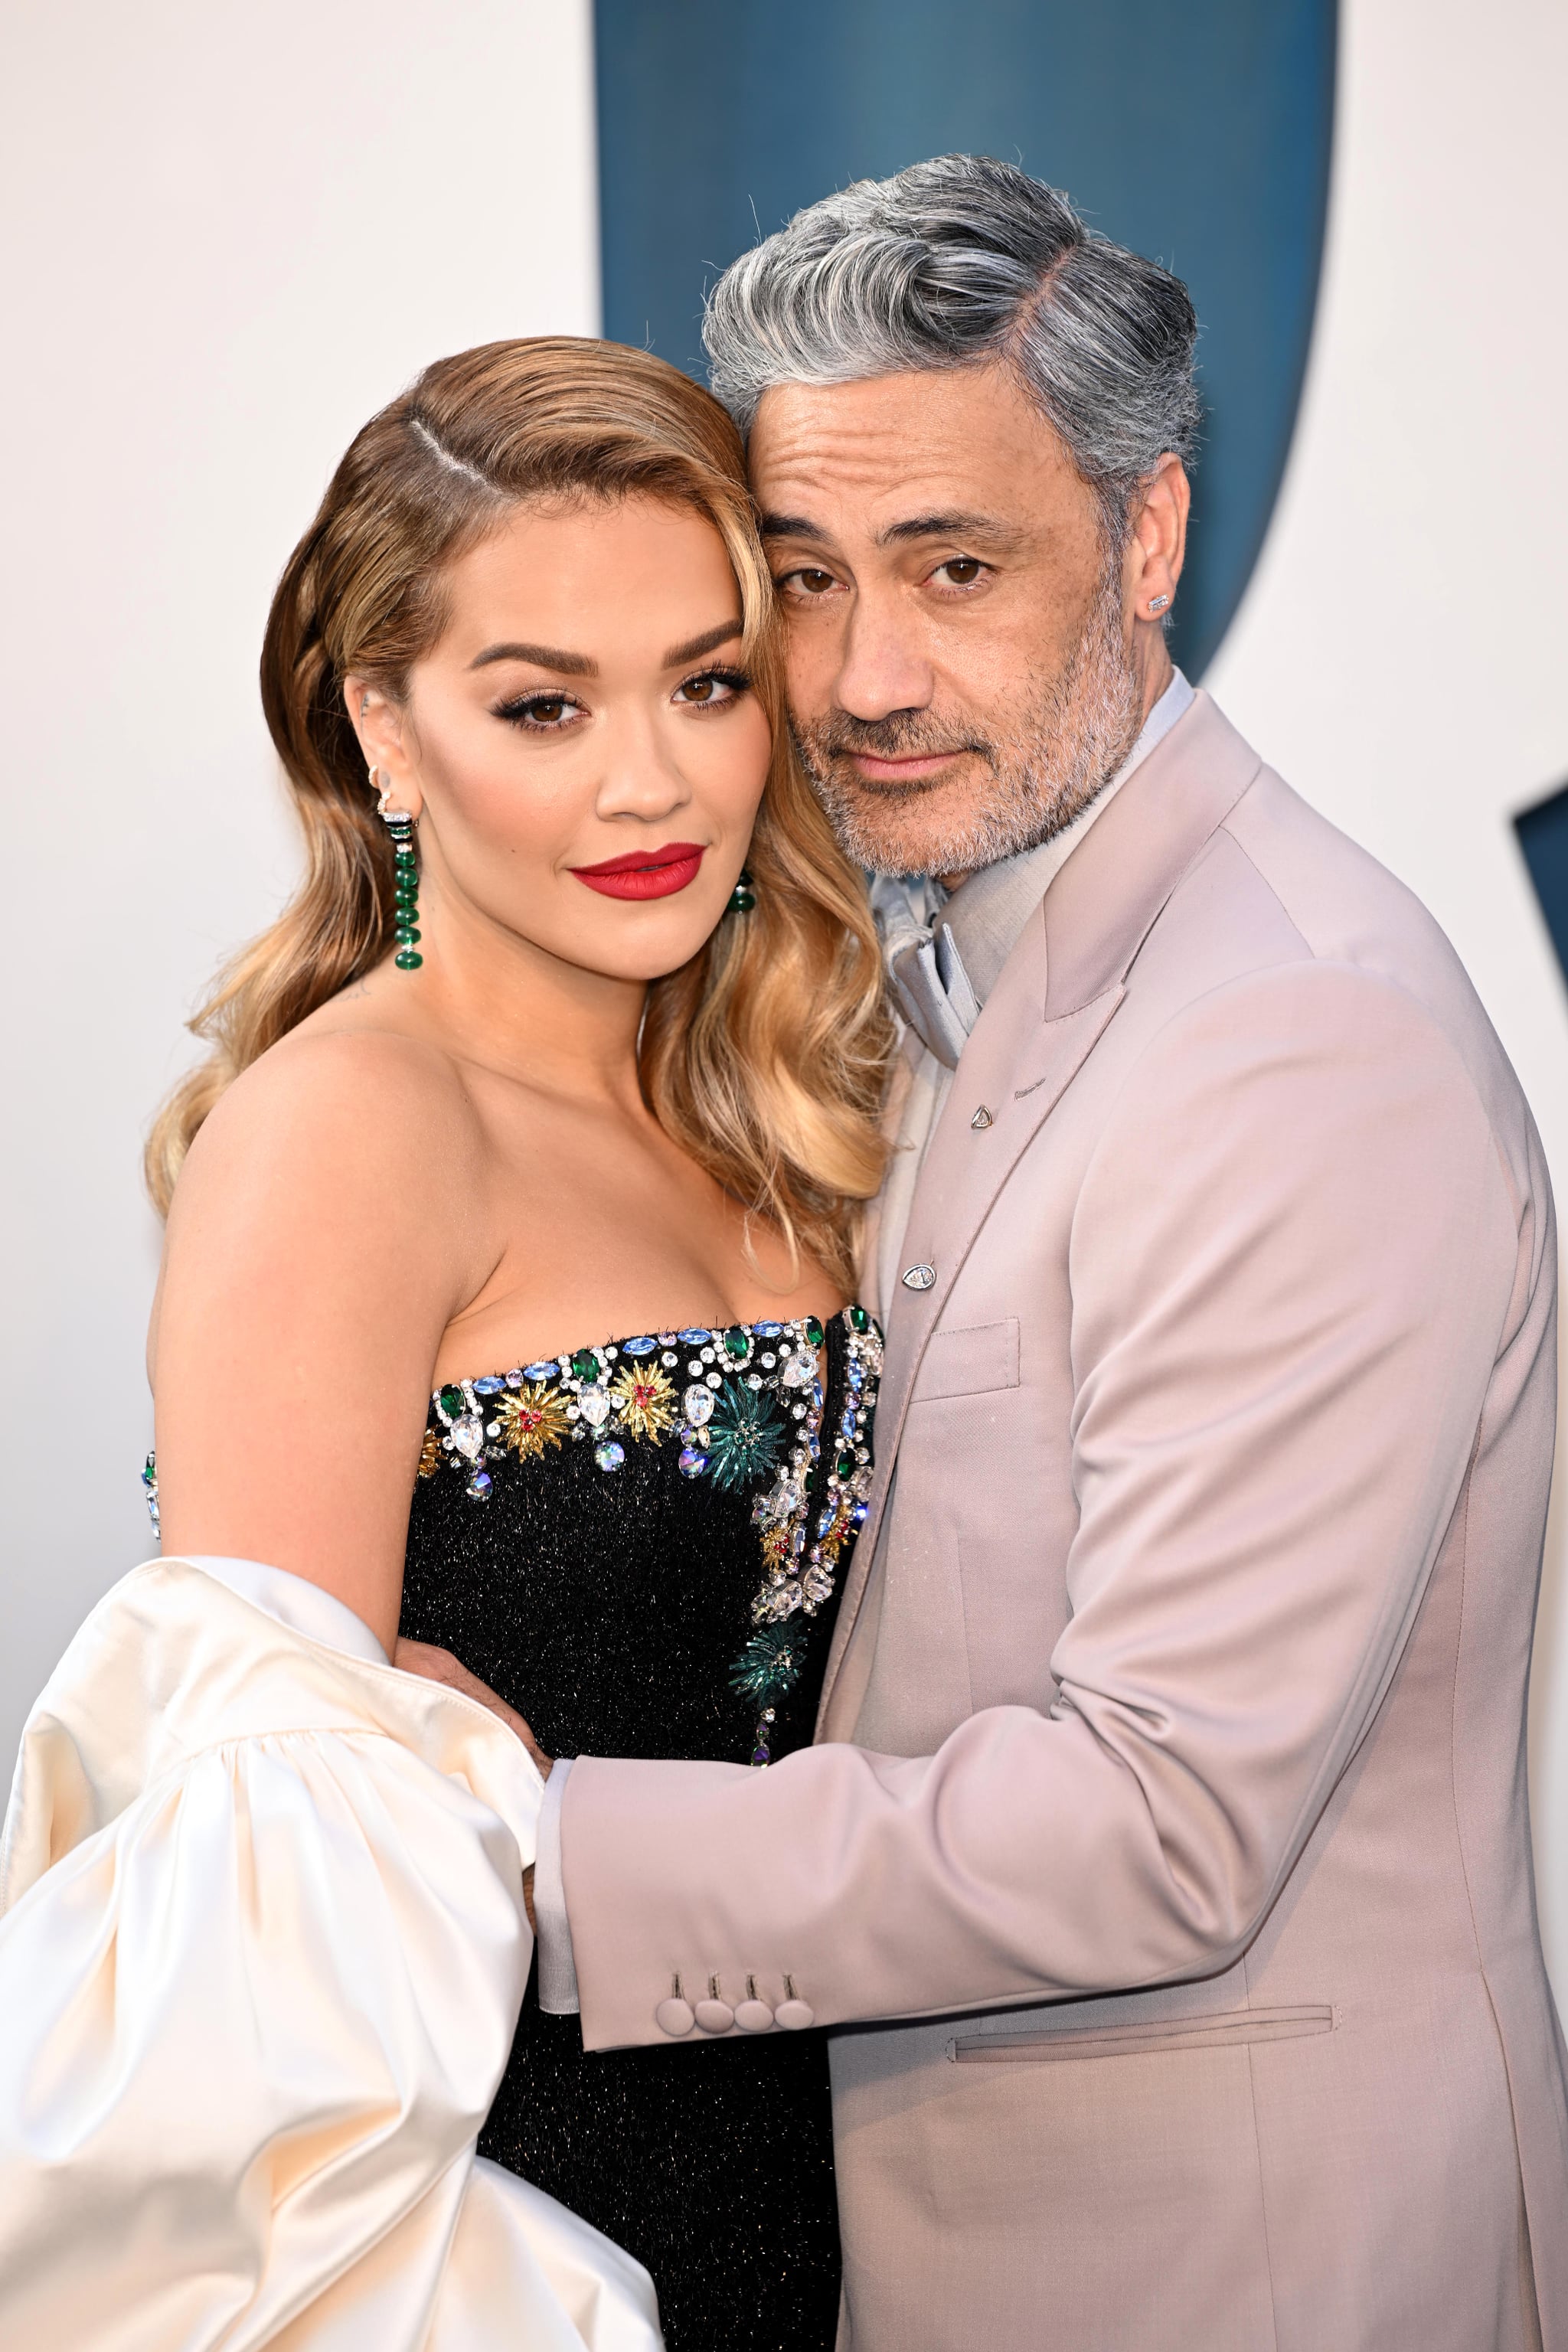 BEVERLY HILLS, CALIFORNIA - MARCH 27: Rita Ora and Taika Waititi attend the 2022 Vanity Fair Oscar Party Hosted by Radhika Jones at Wallis Annenberg Center for the Performing Arts on March 27, 2022 in Beverly Hills, California. (Photo by Daniele Venturelli/WireImage)